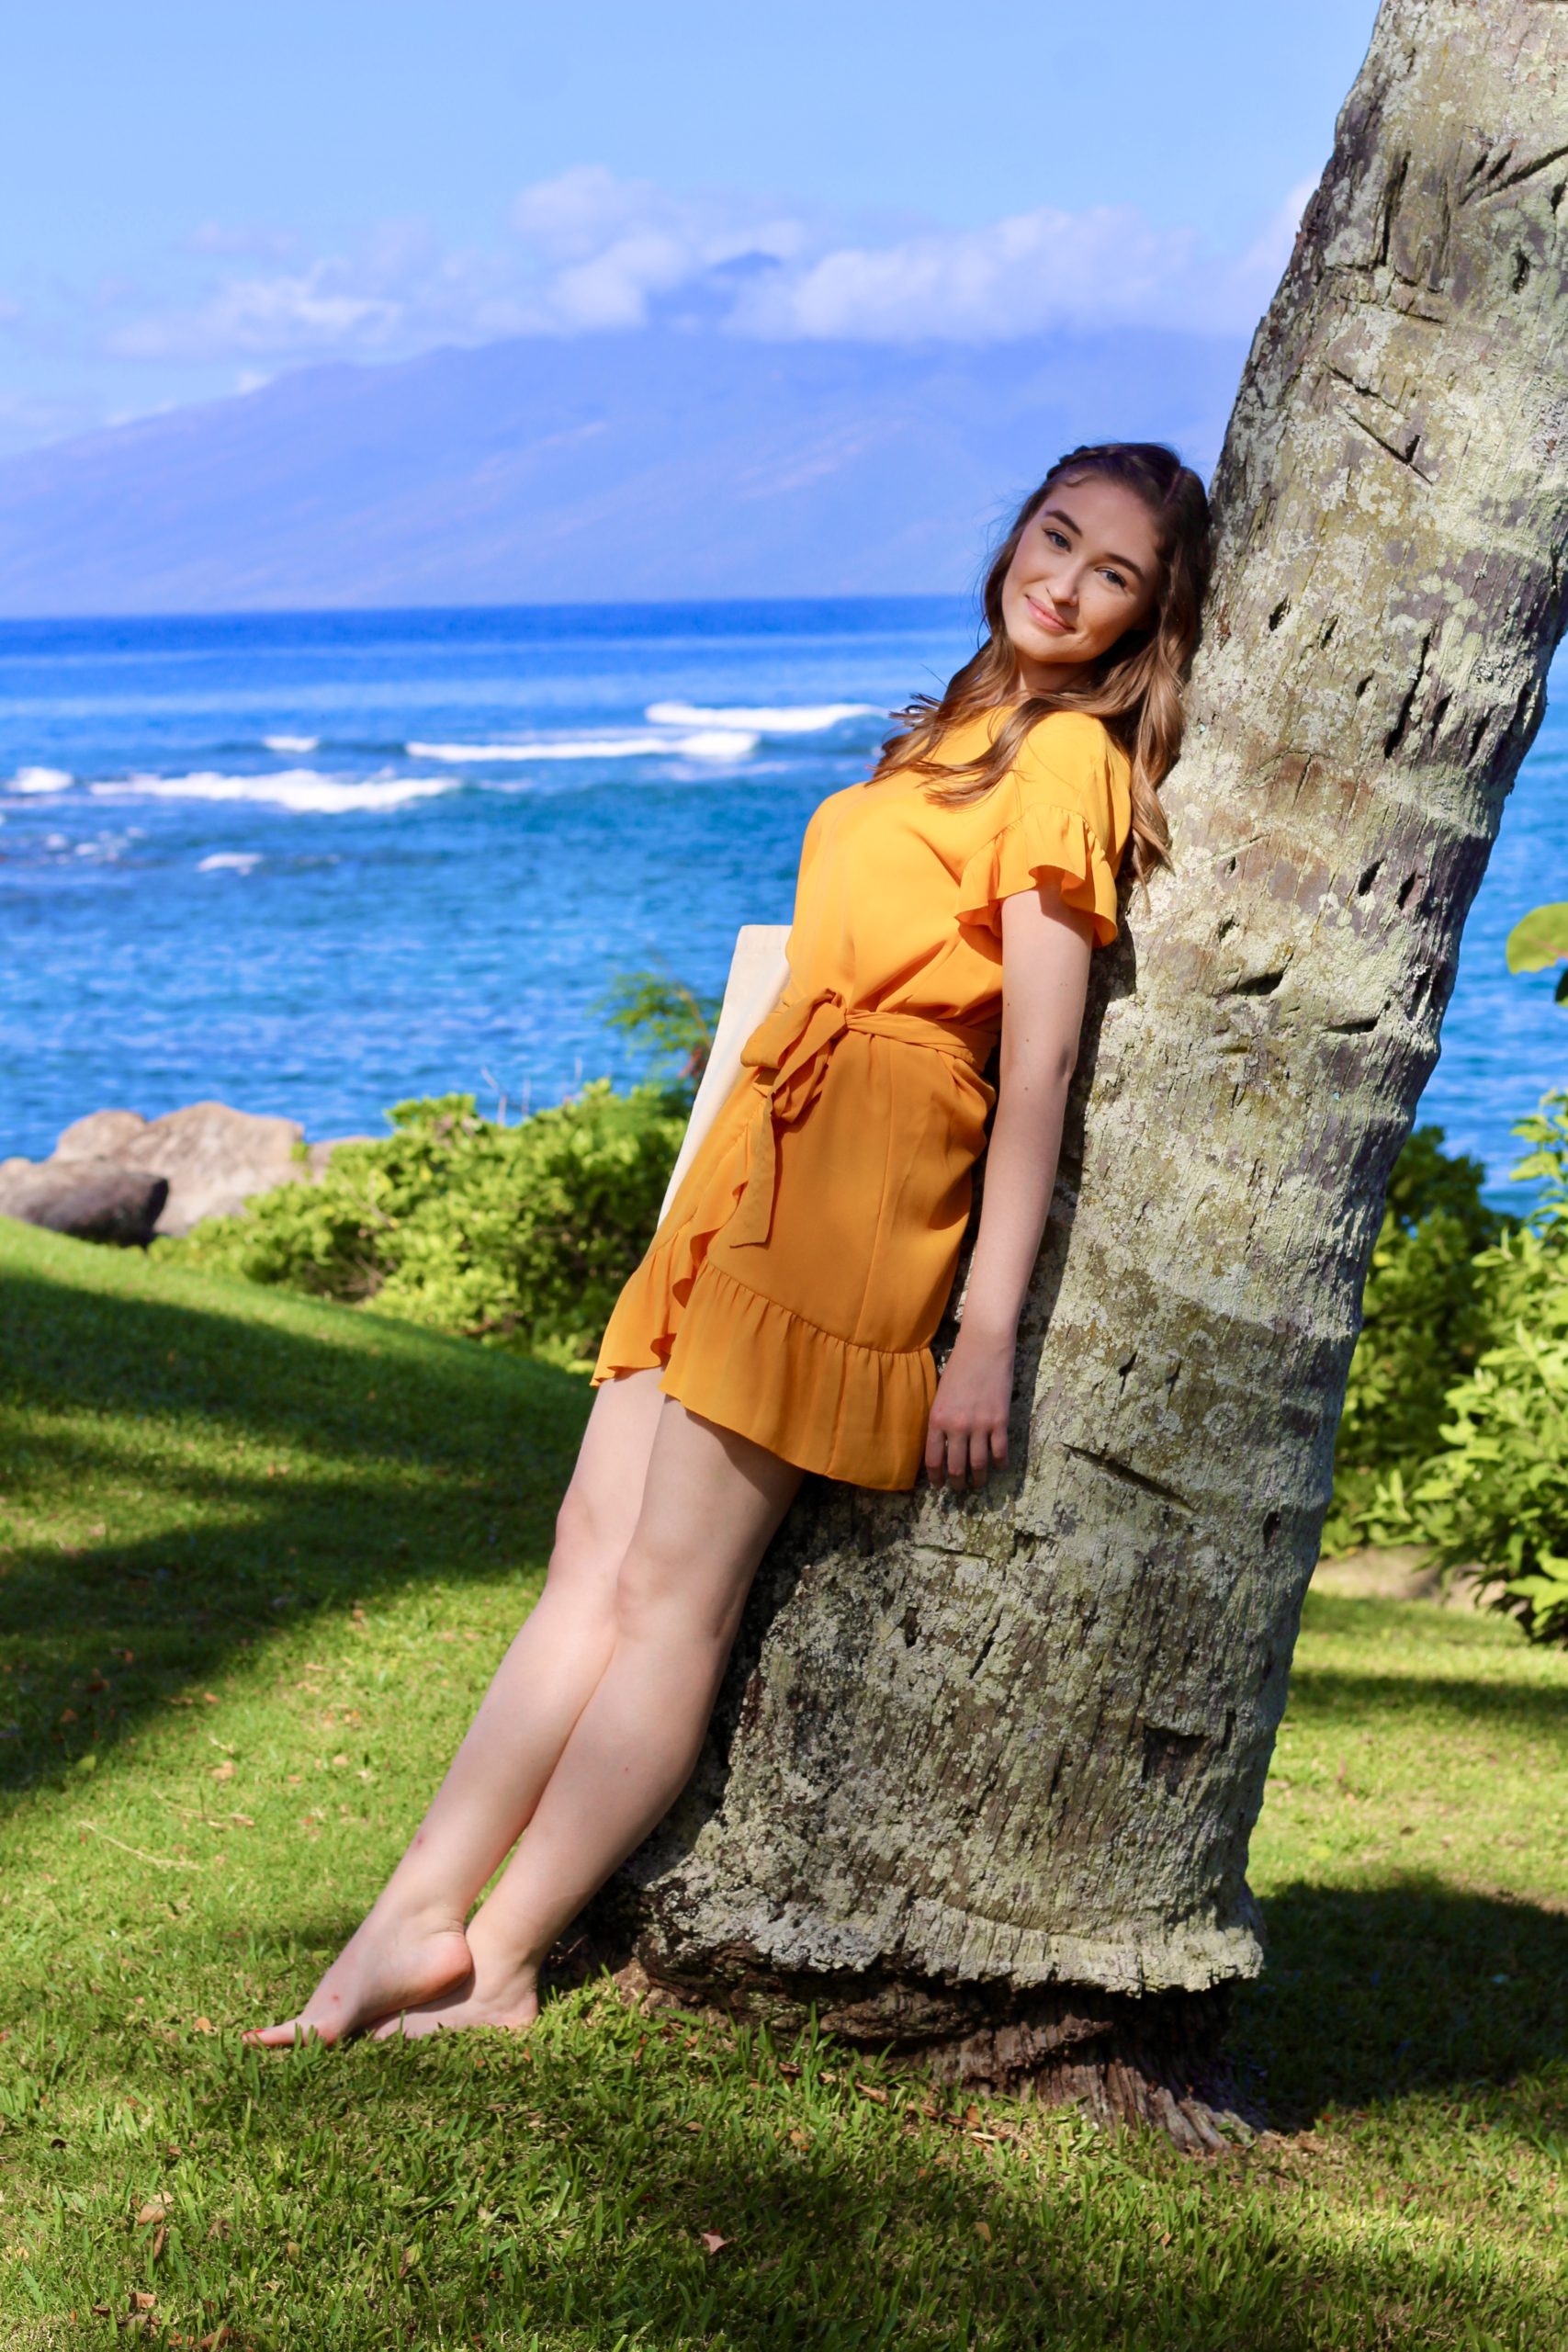 Maui outfit of the day featuring aritzia wilfred ninette dress in Tuscan Sun